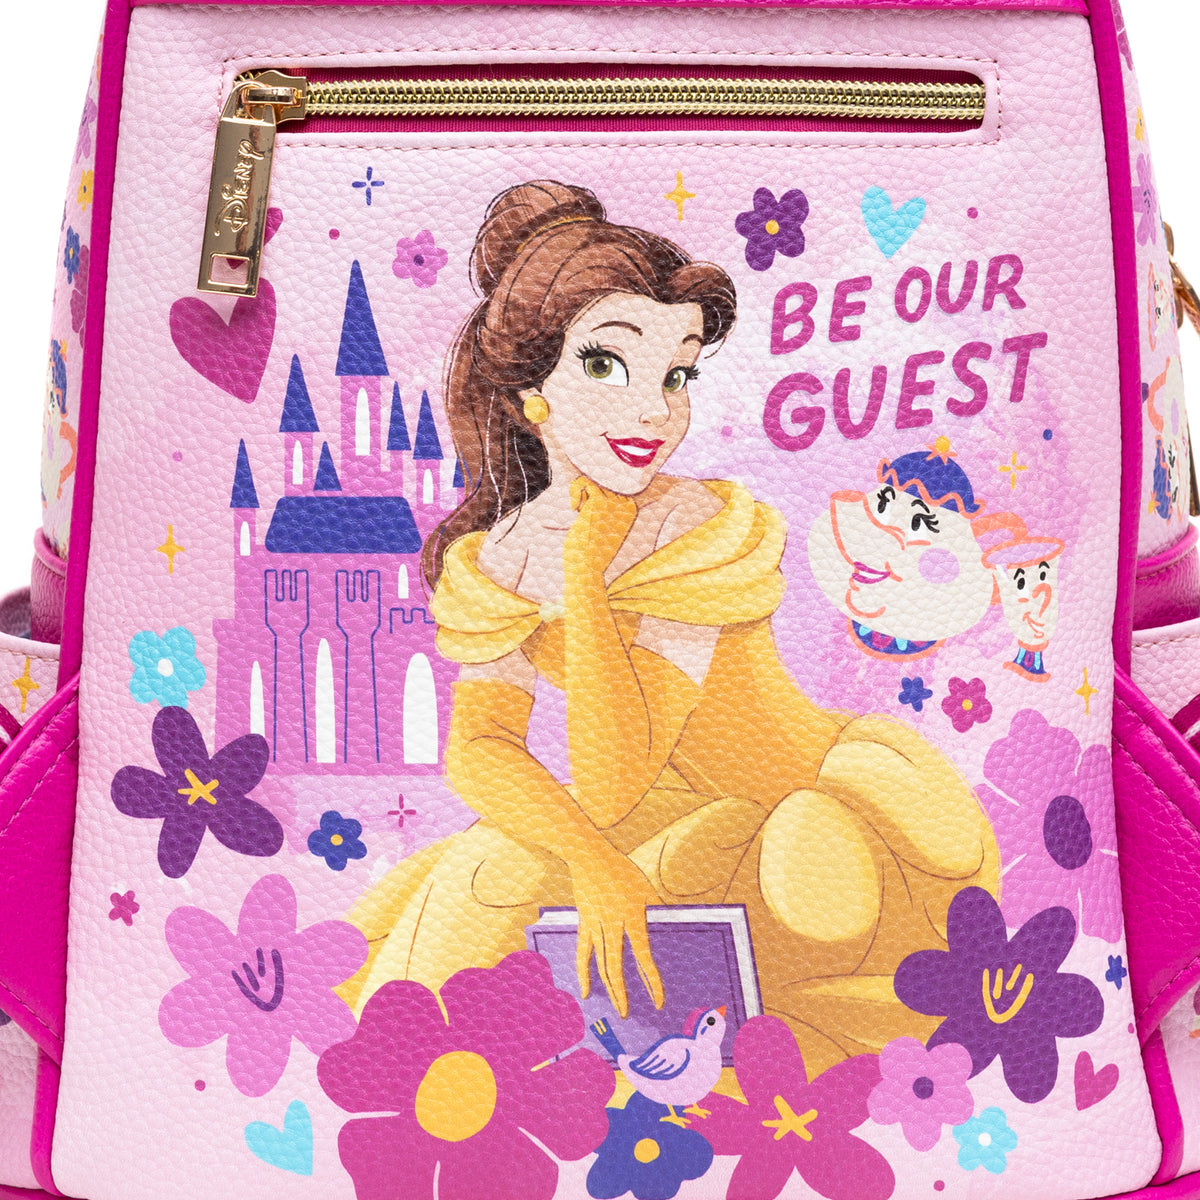 Disney Princess Beauty and the Beast Mini Backpack - Limited Edition